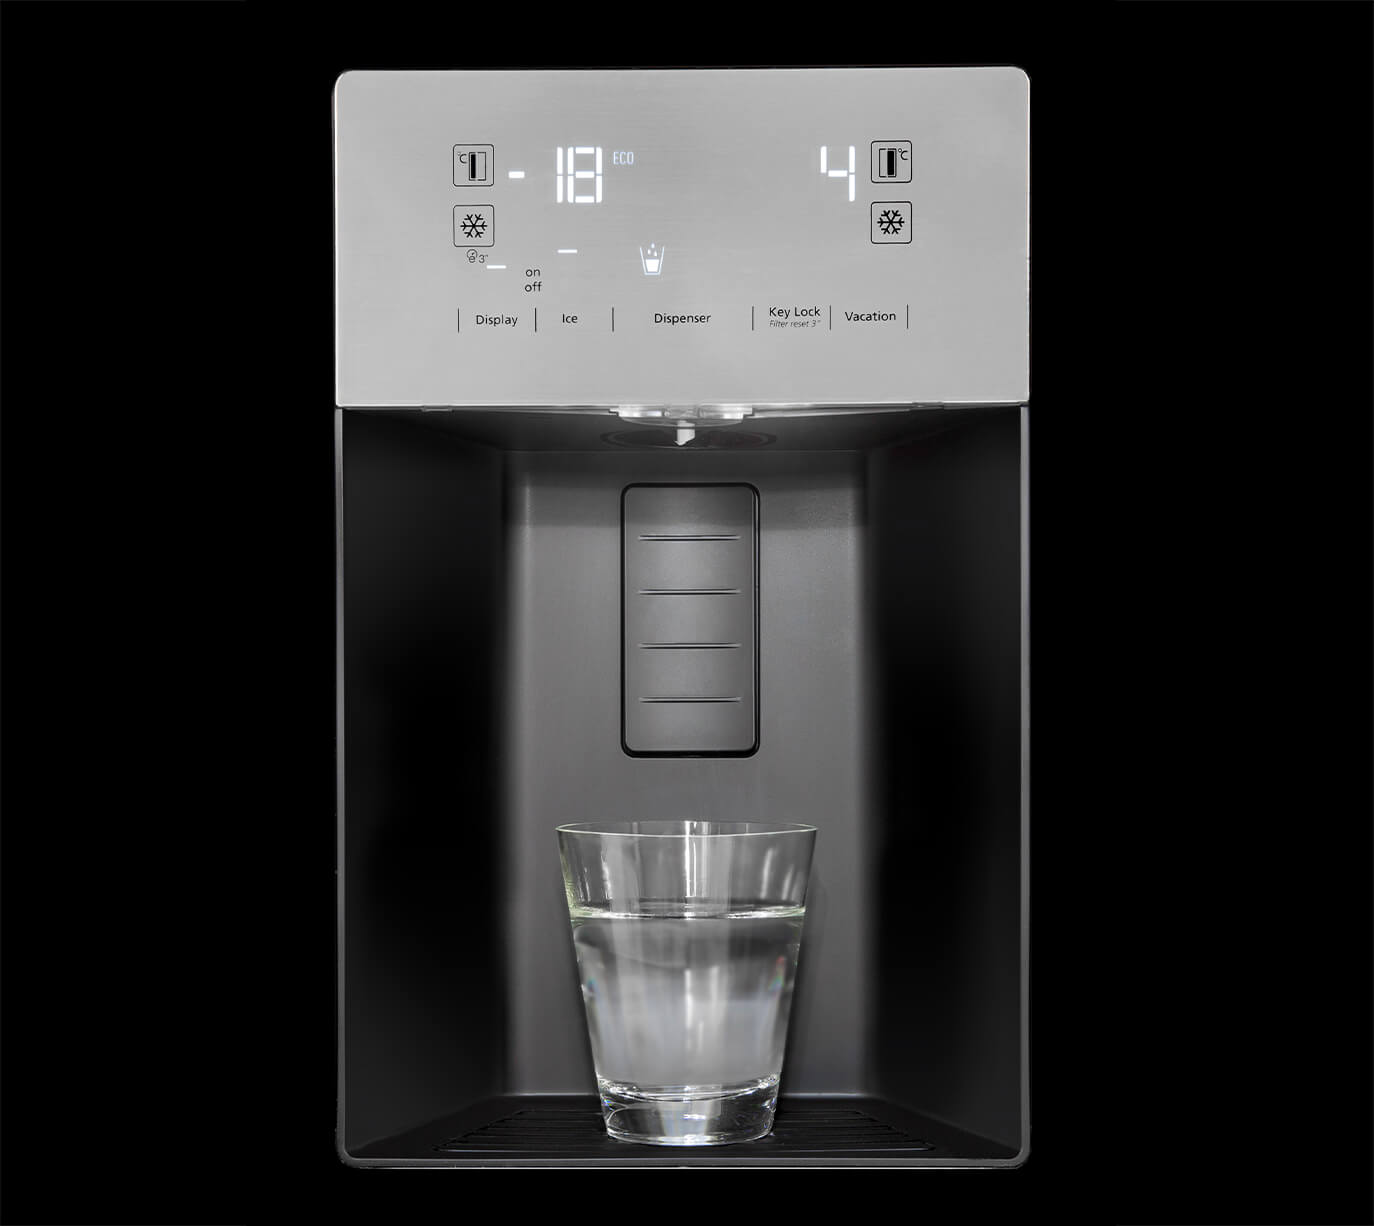 Plumbed Water and Ice Dispenser